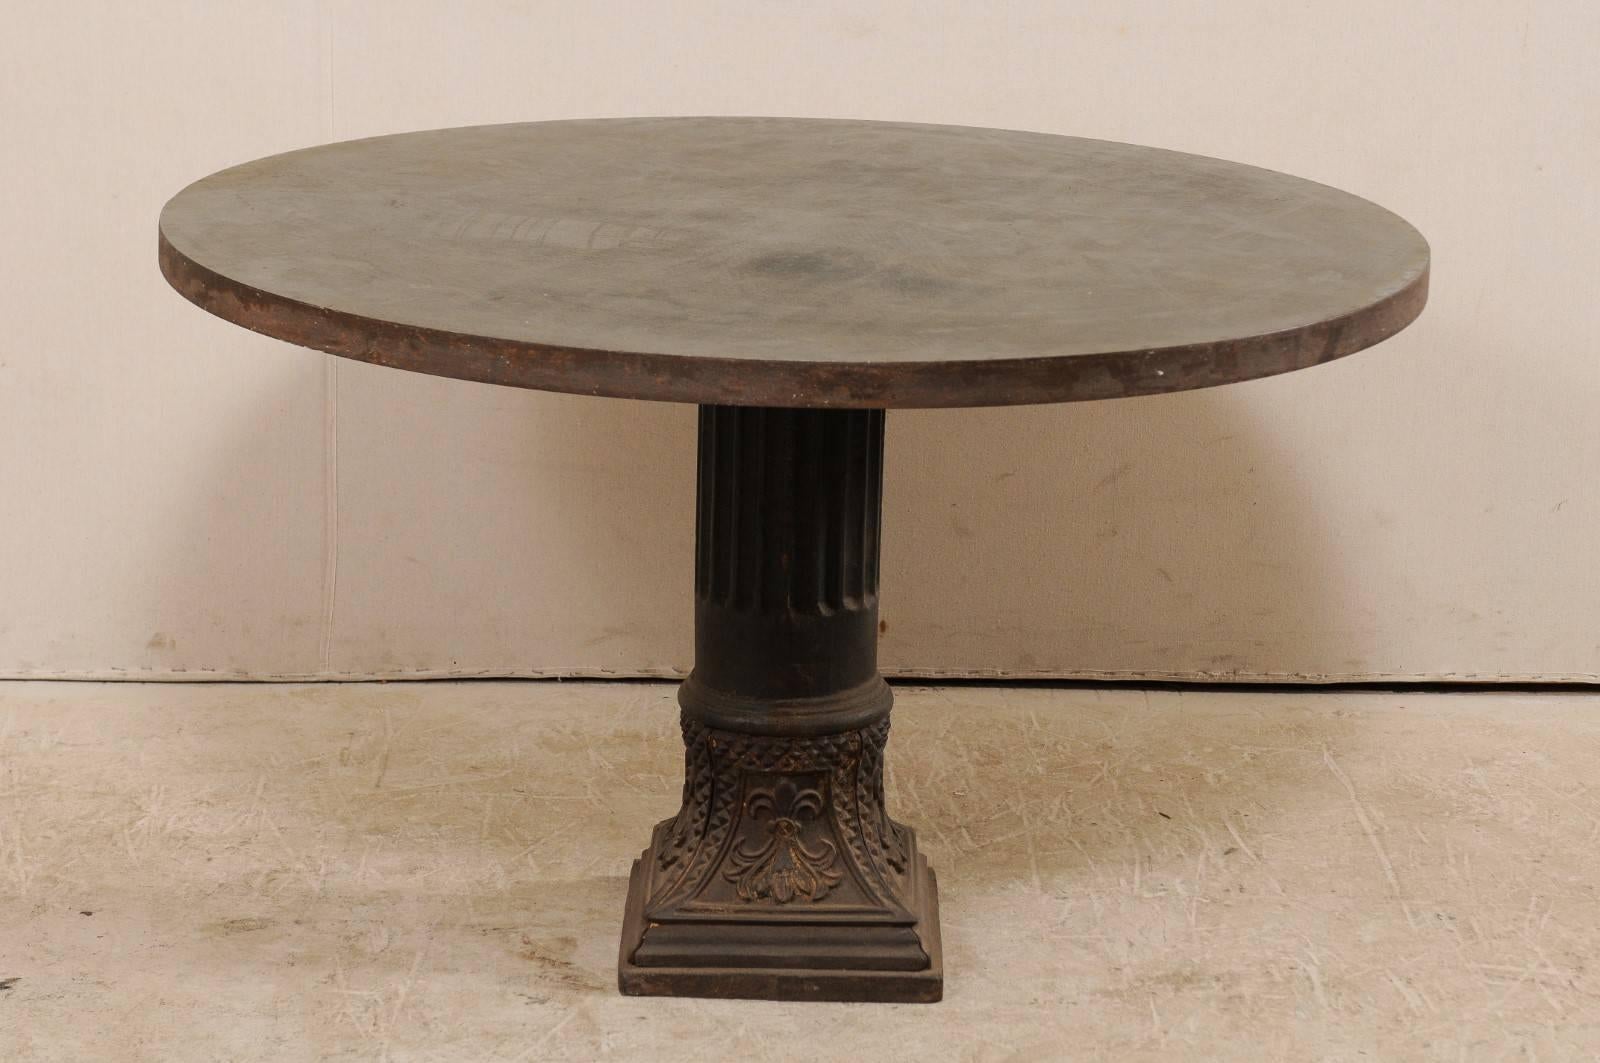 A custom American round-shaped centre table with early 20th century column pedestal base. This American table features an artisan-crafted 4 ft. diameter patinated steel wrapped wooden top which is supported by an early 20th century metal fluted